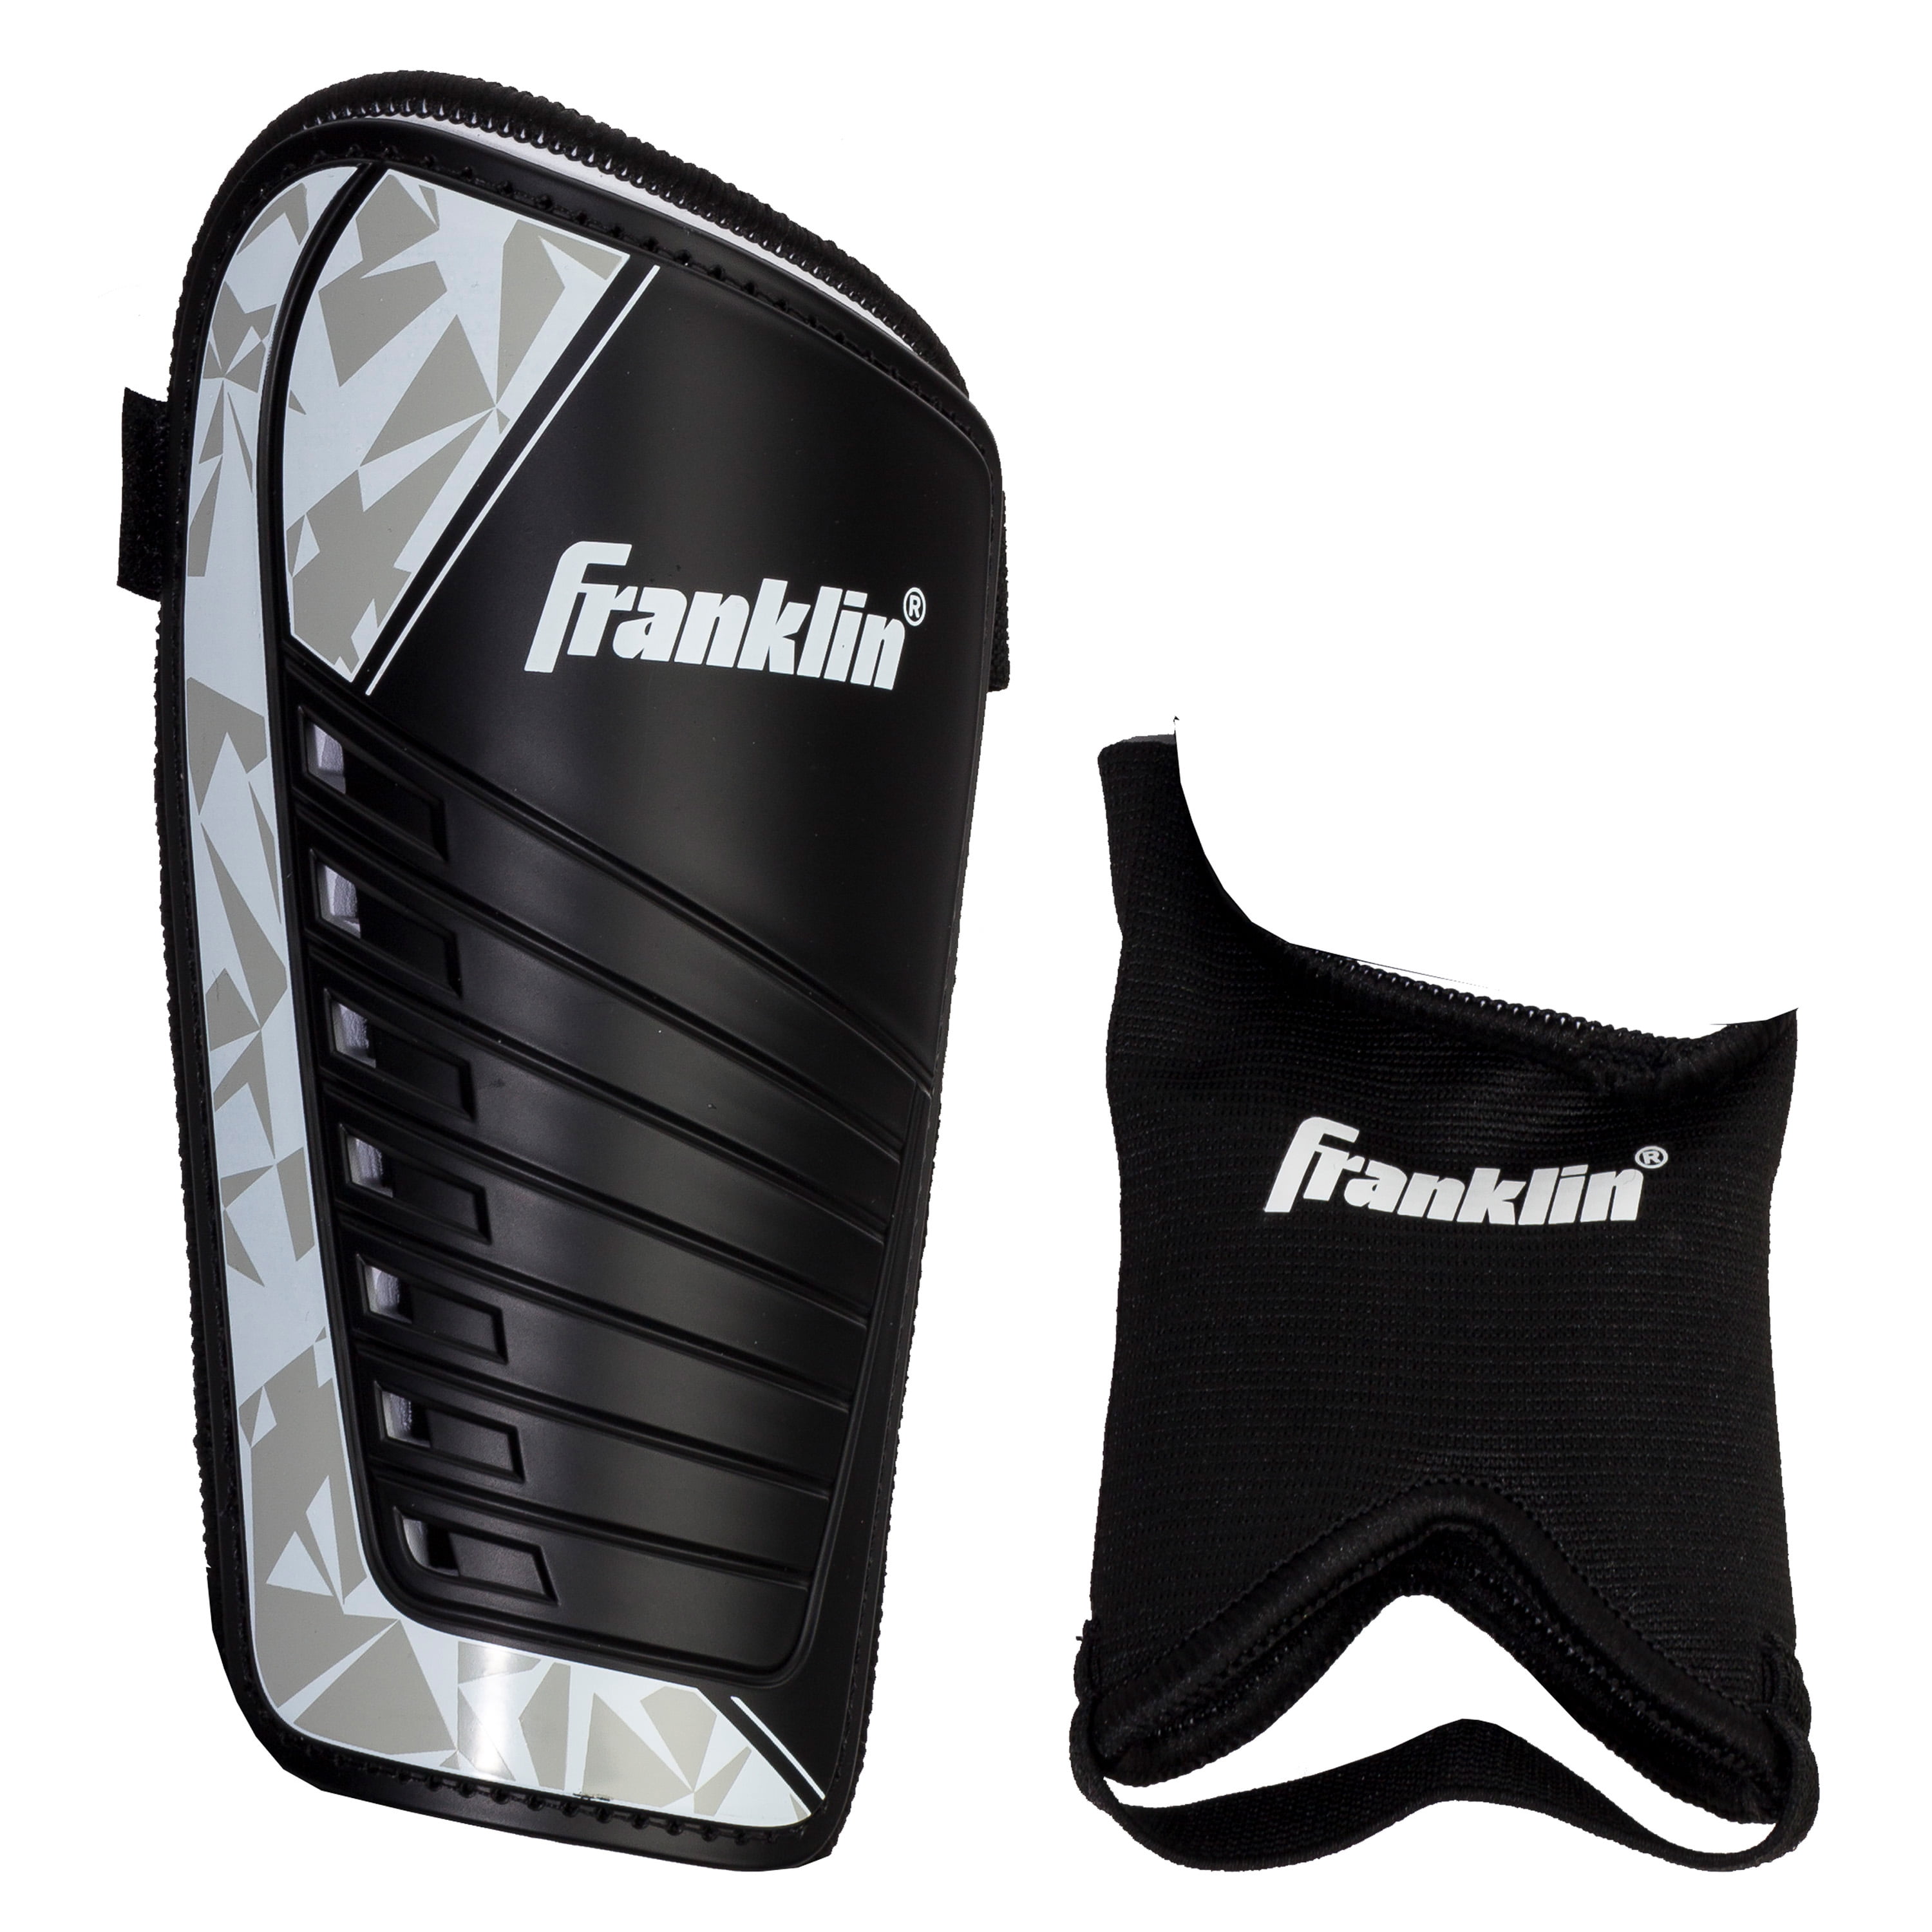 LARGE Details about   NWT FRANKLIN EXTREME LIGHTWEIGHT SOCCER SLEEVE  GUARD 